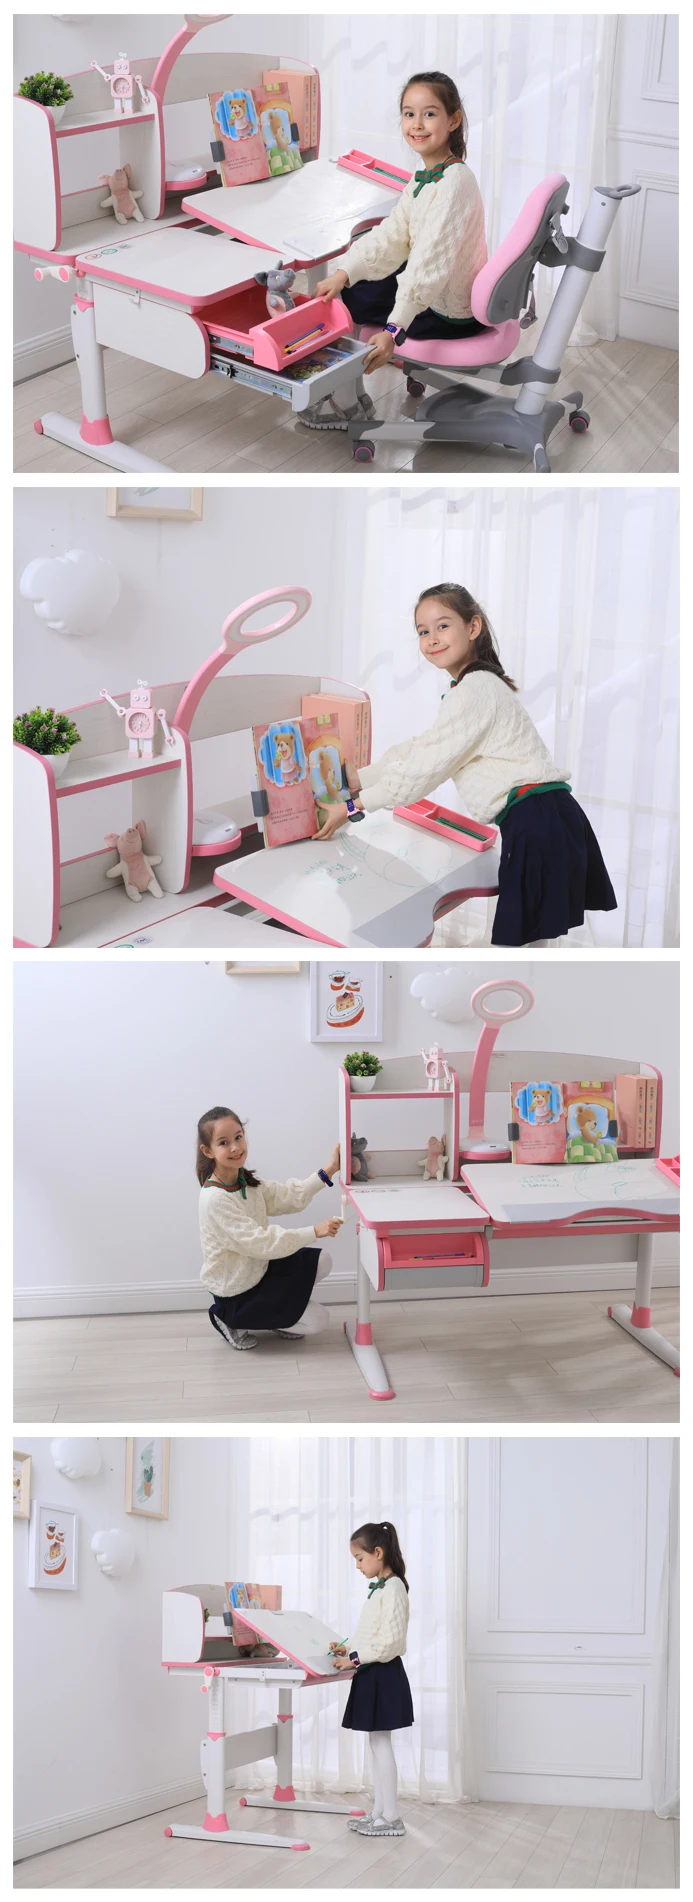 Learning Desk And Chair For Children School Student Reading Writing Drawing